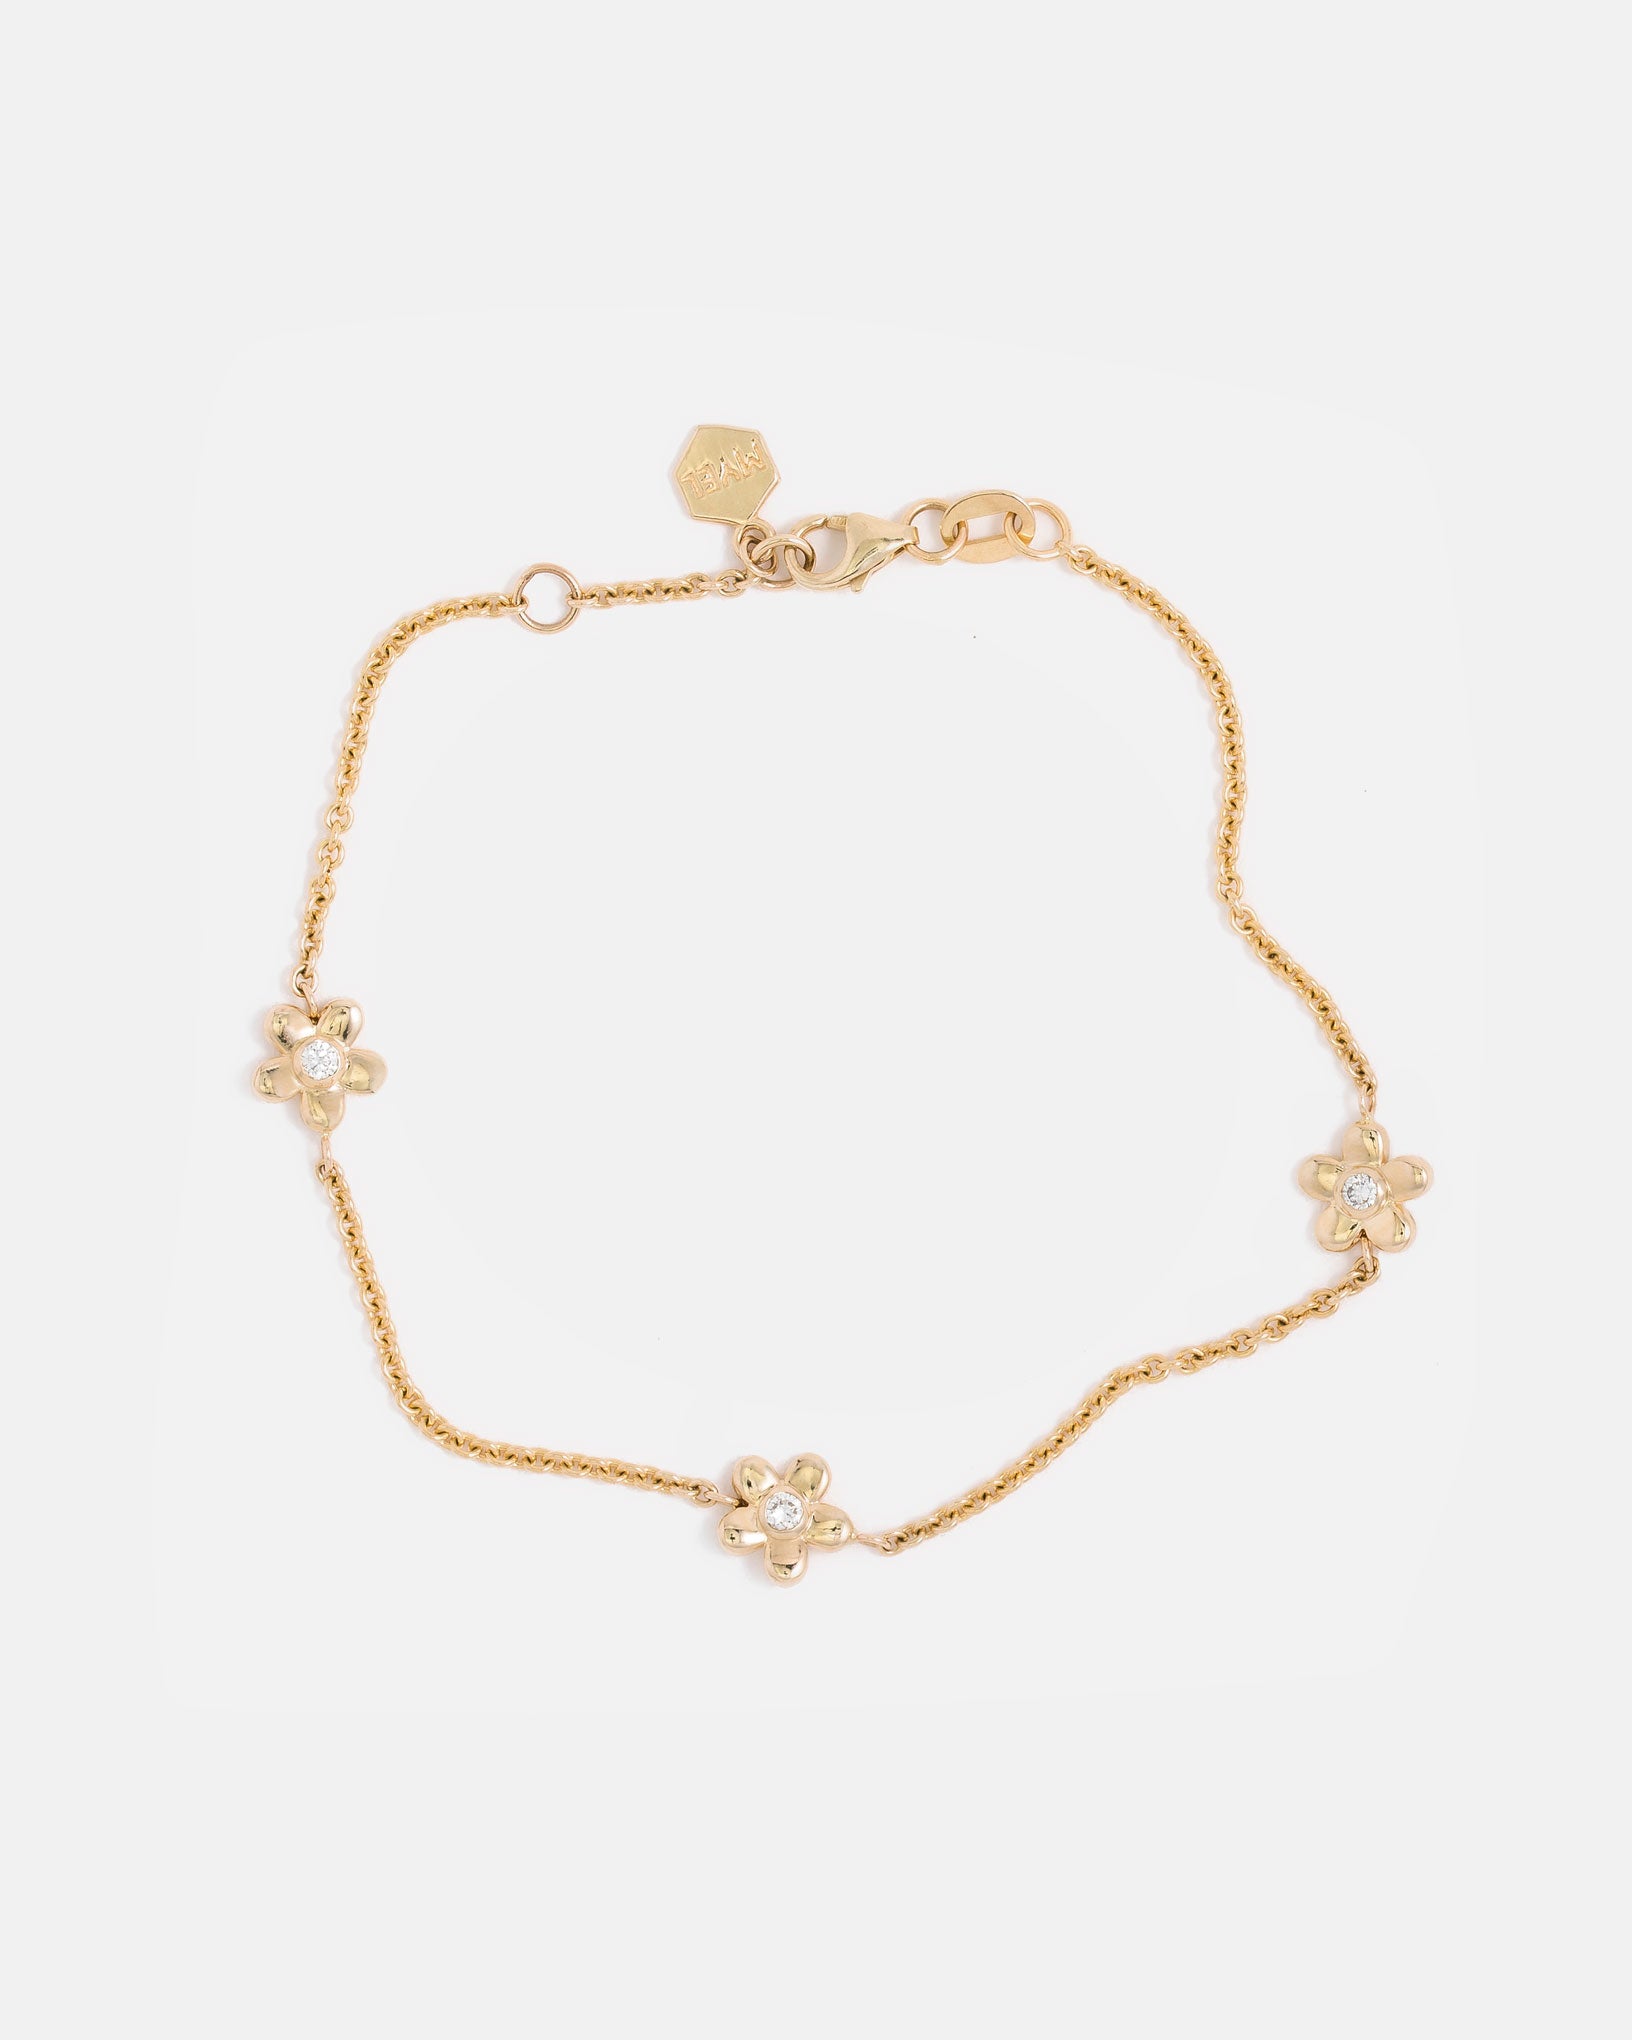 Daisy Bracelet in Yellow Gold with lab grown Diamonds